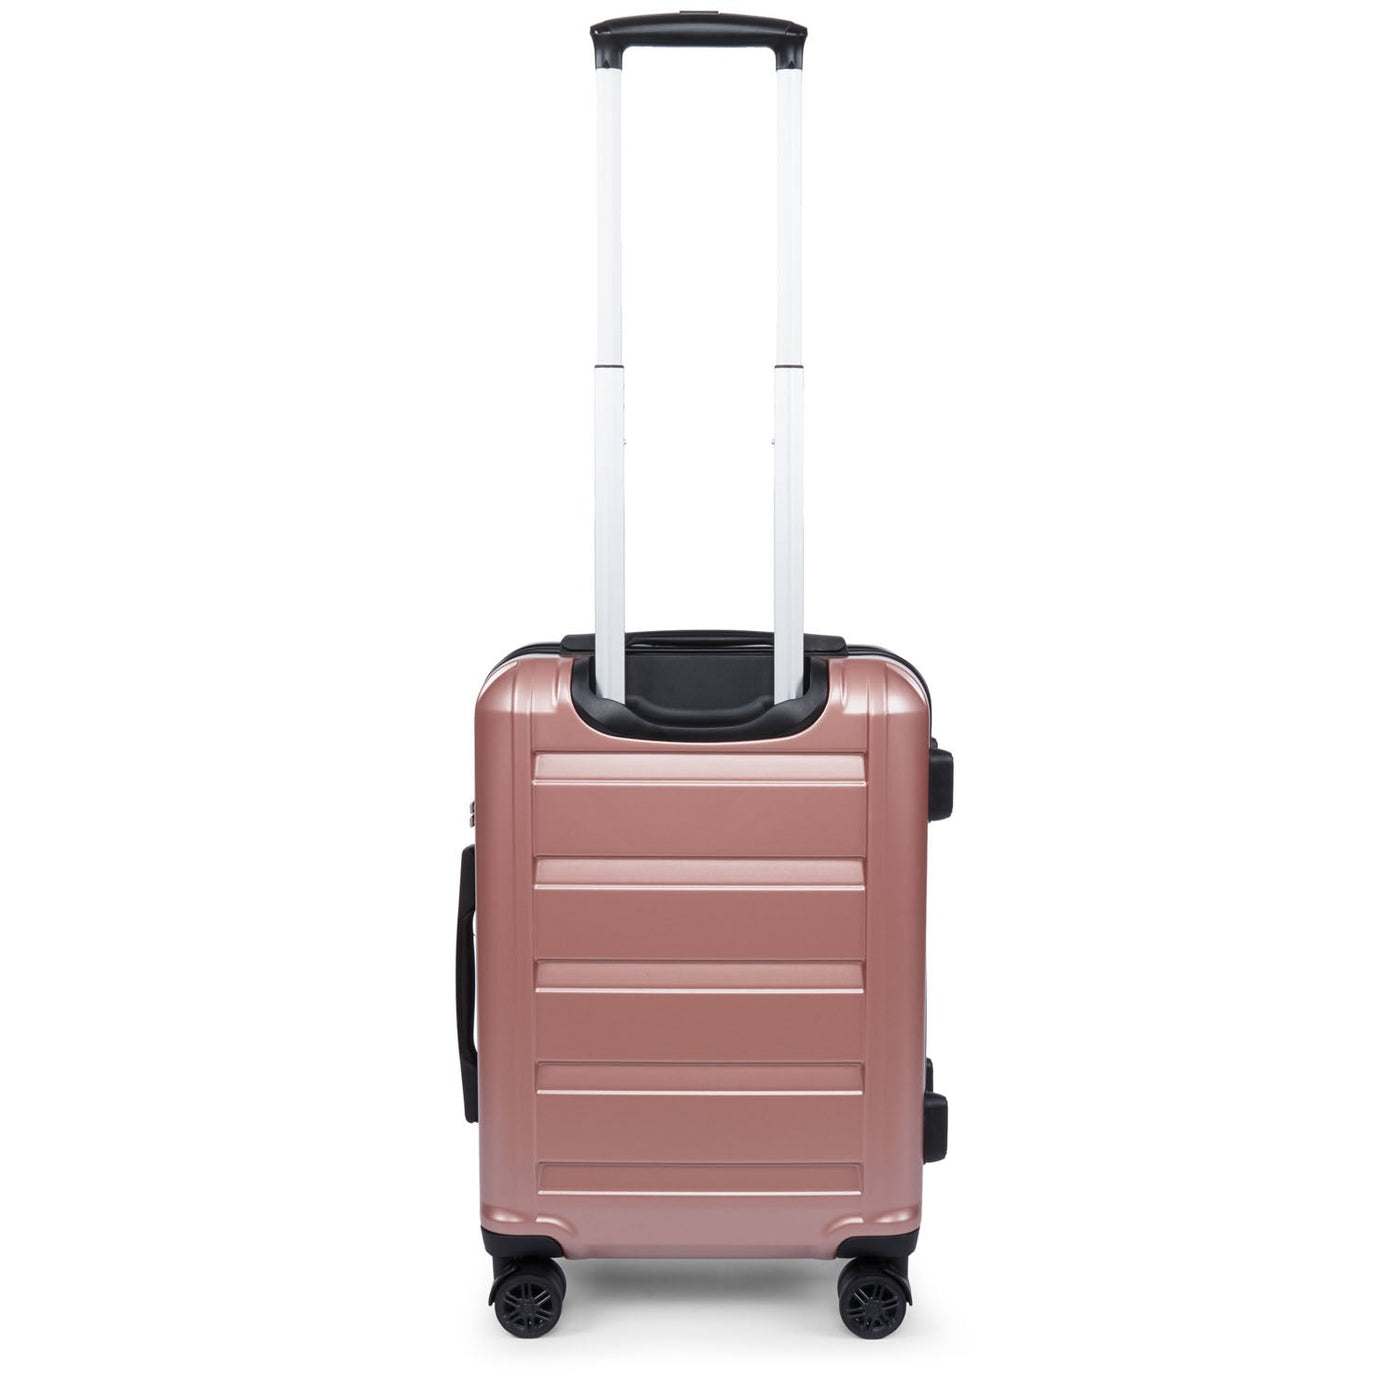 cabin luggage - luggage #couleur_or-rose